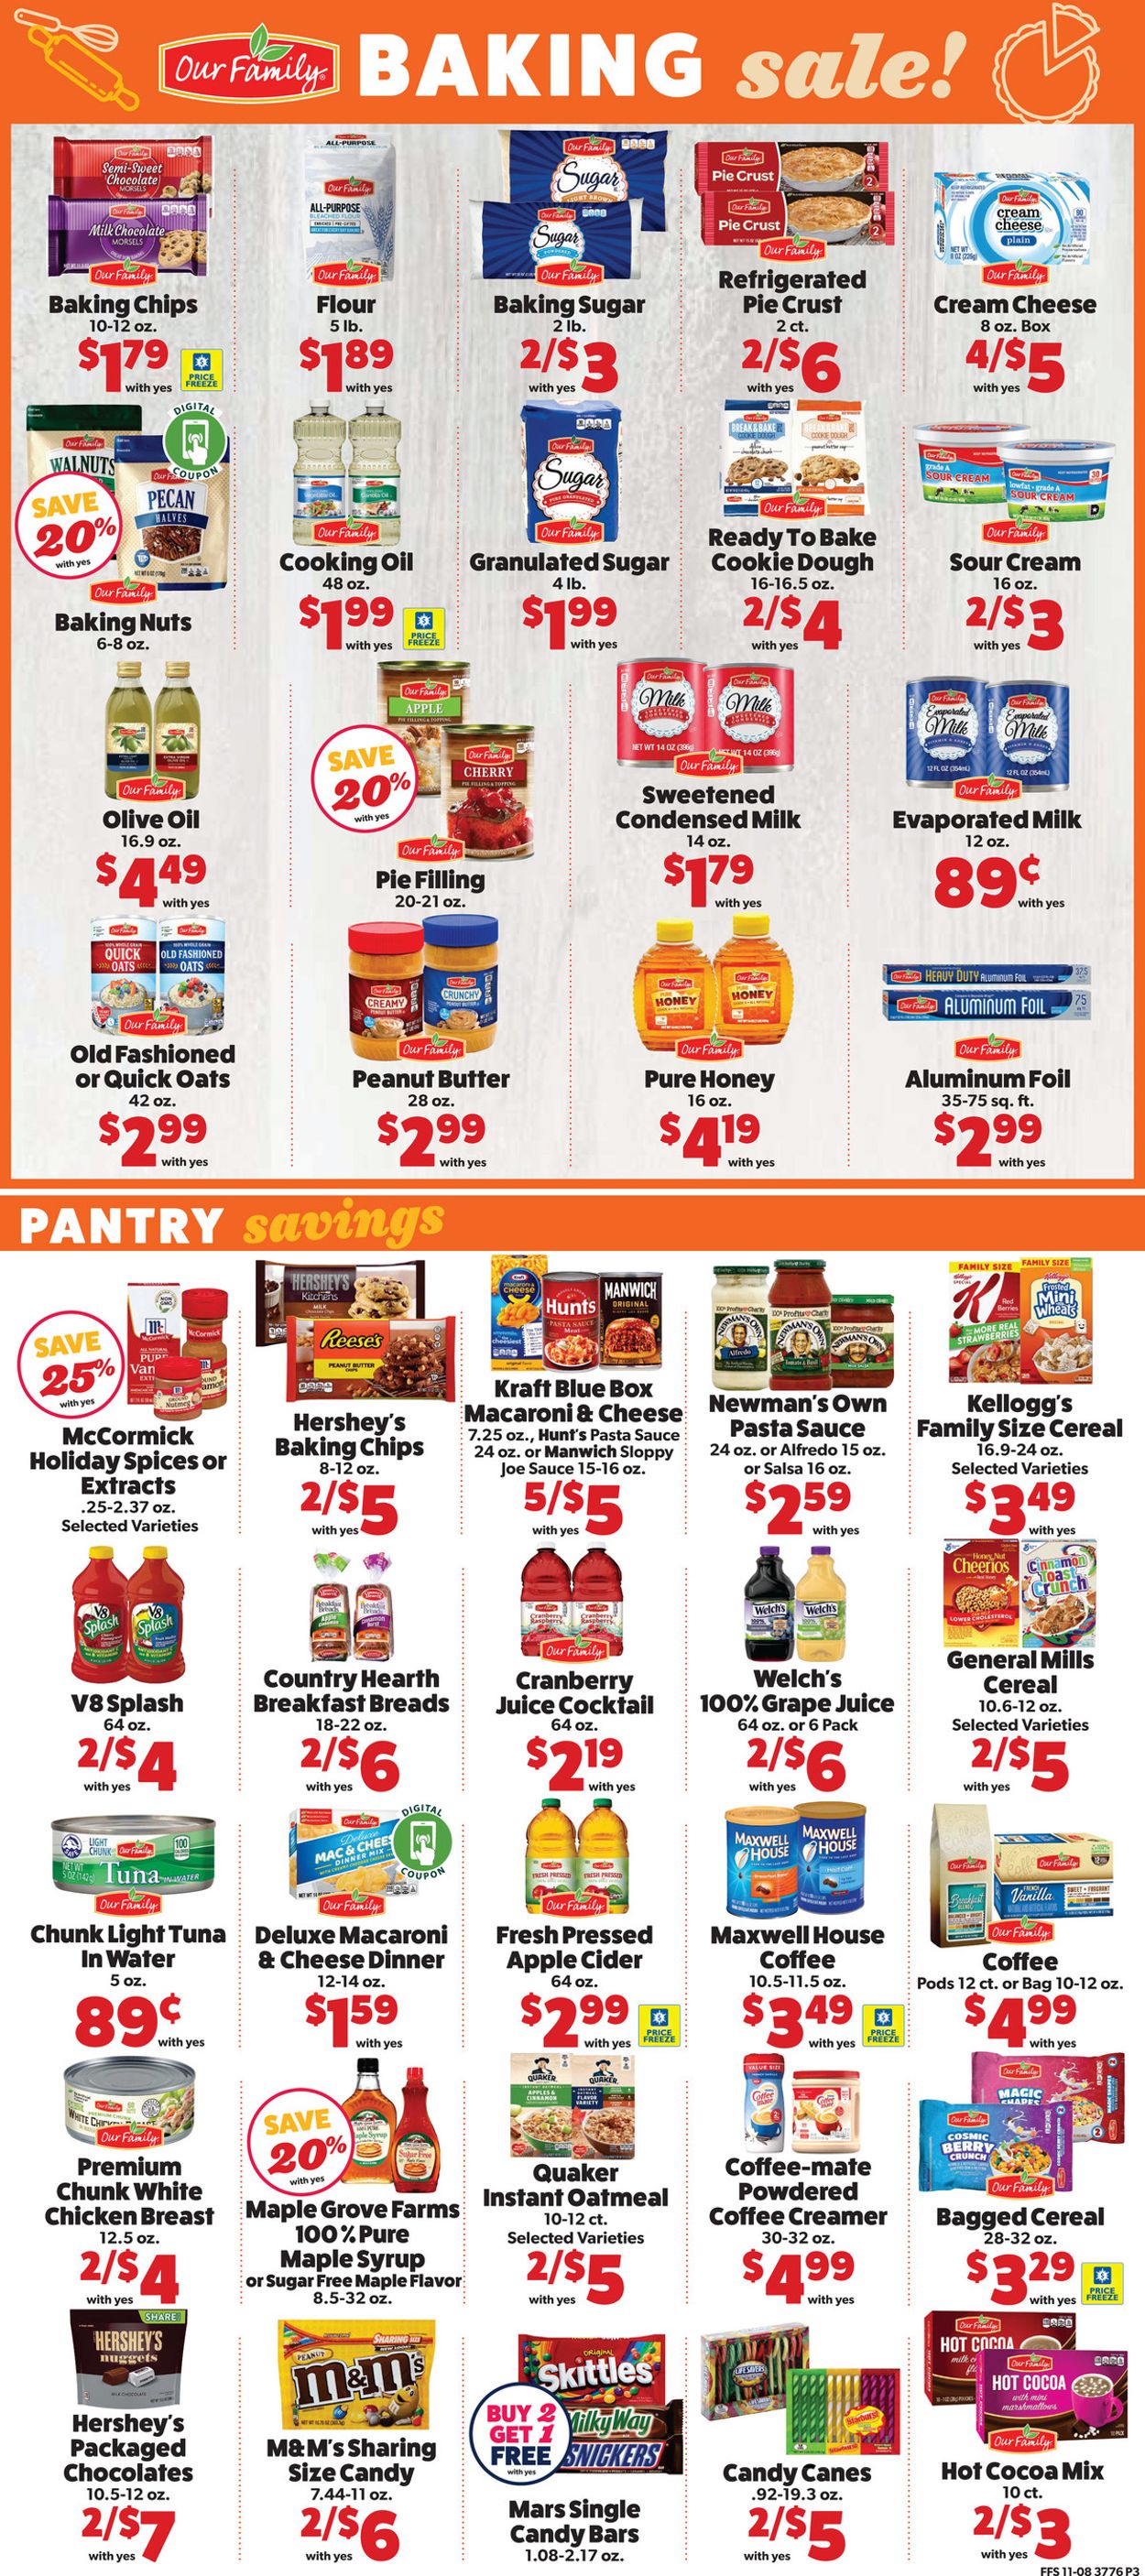 Family Fare Ad from 11/11/2020